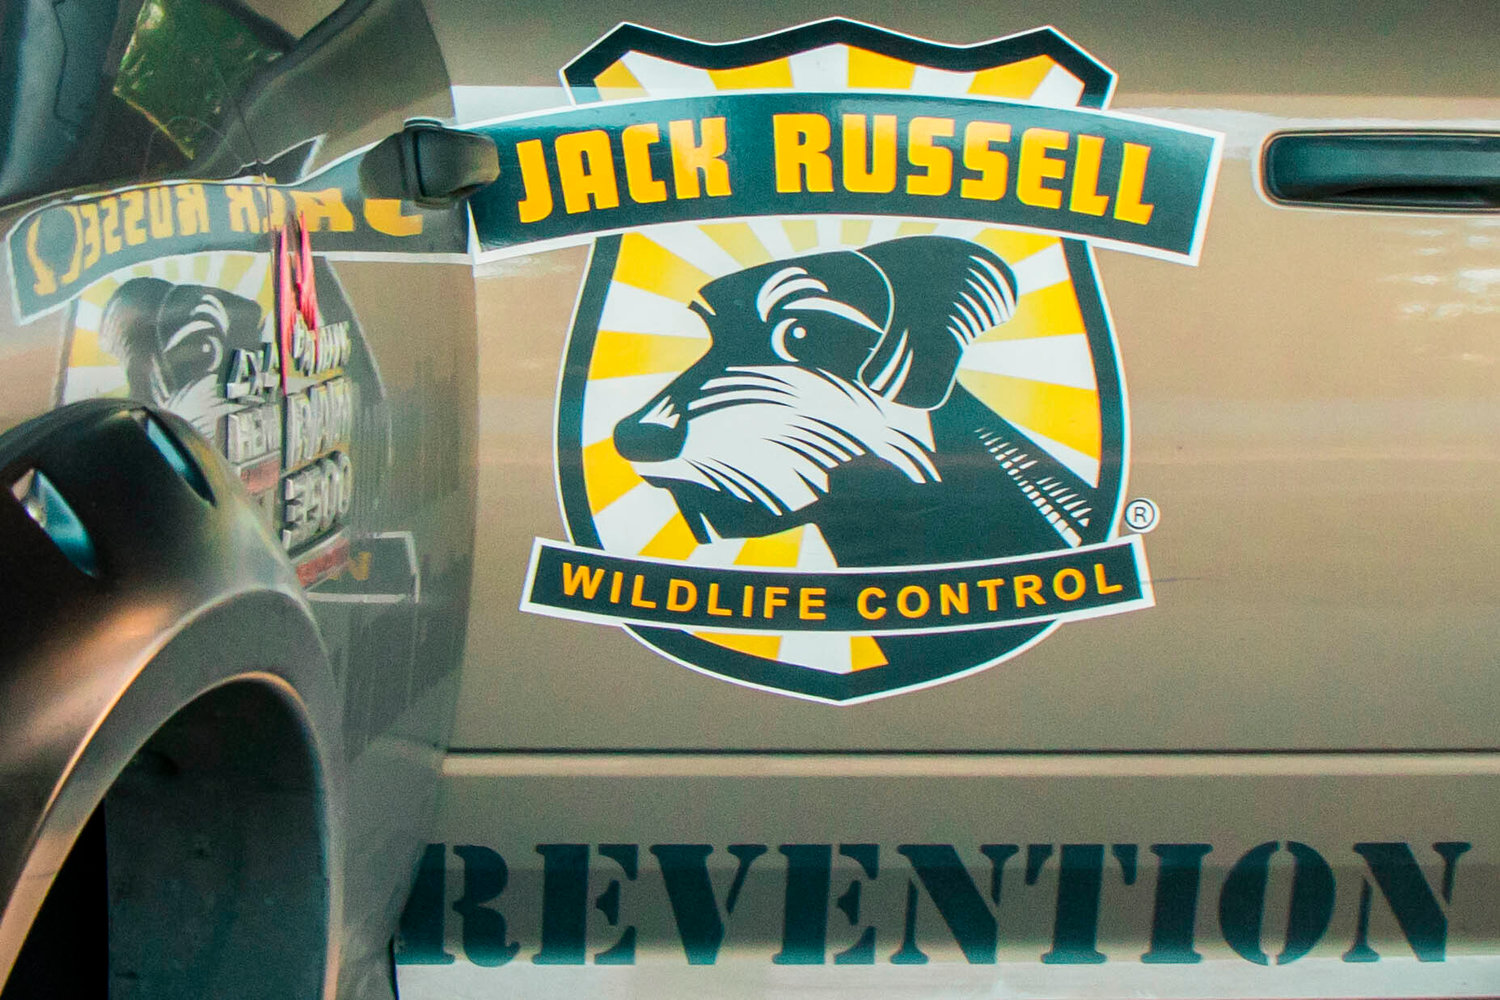 A Jack Russell Wildlife Control vehichle is seen parked Friday morning in Centralia.